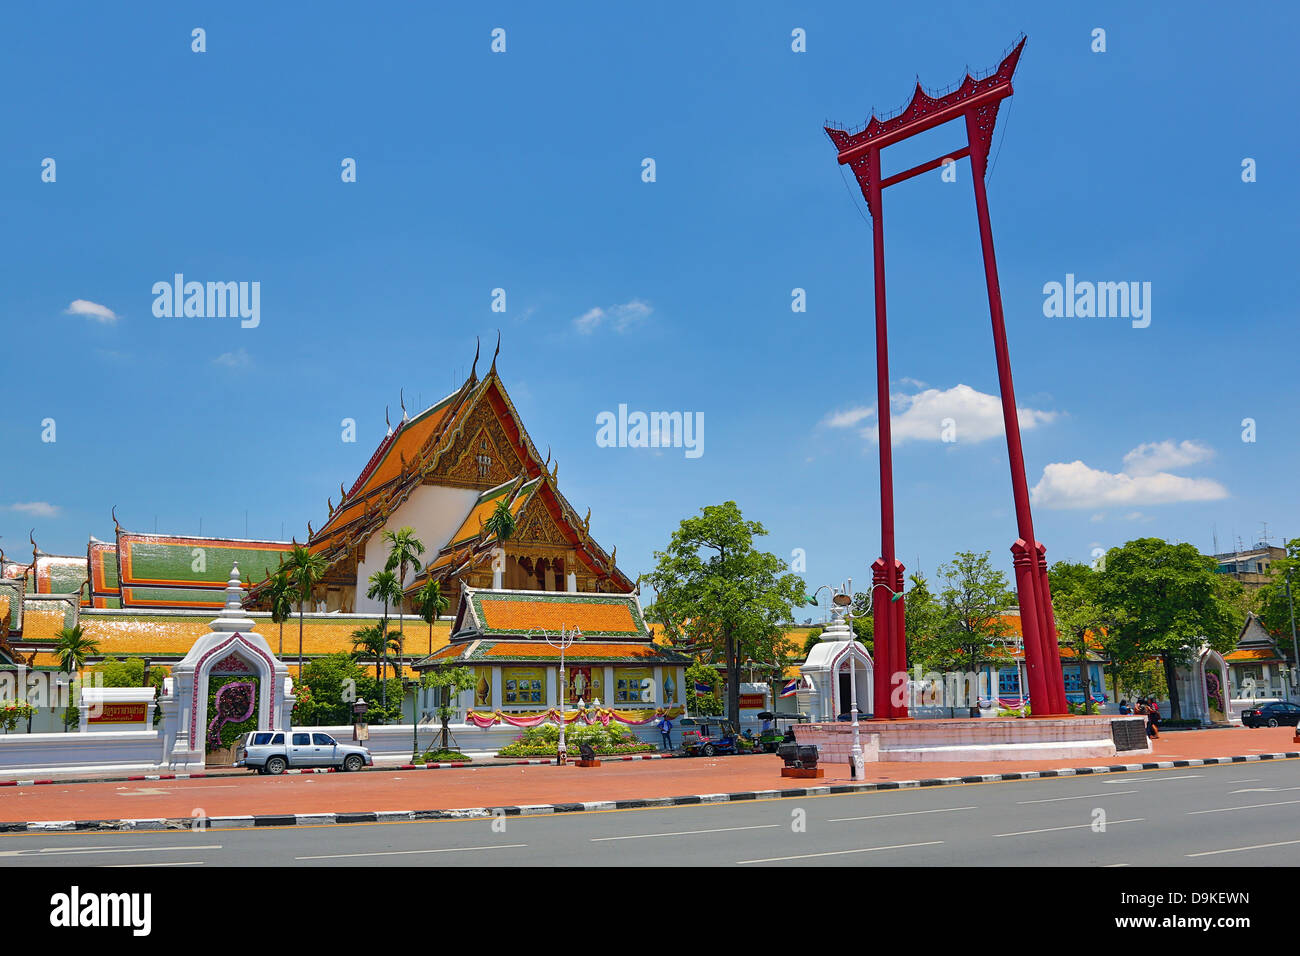 The Giant Swing, Sao Ching Cha,and Wat Suthat Temple, Bangkok, Thailand Stock Photo